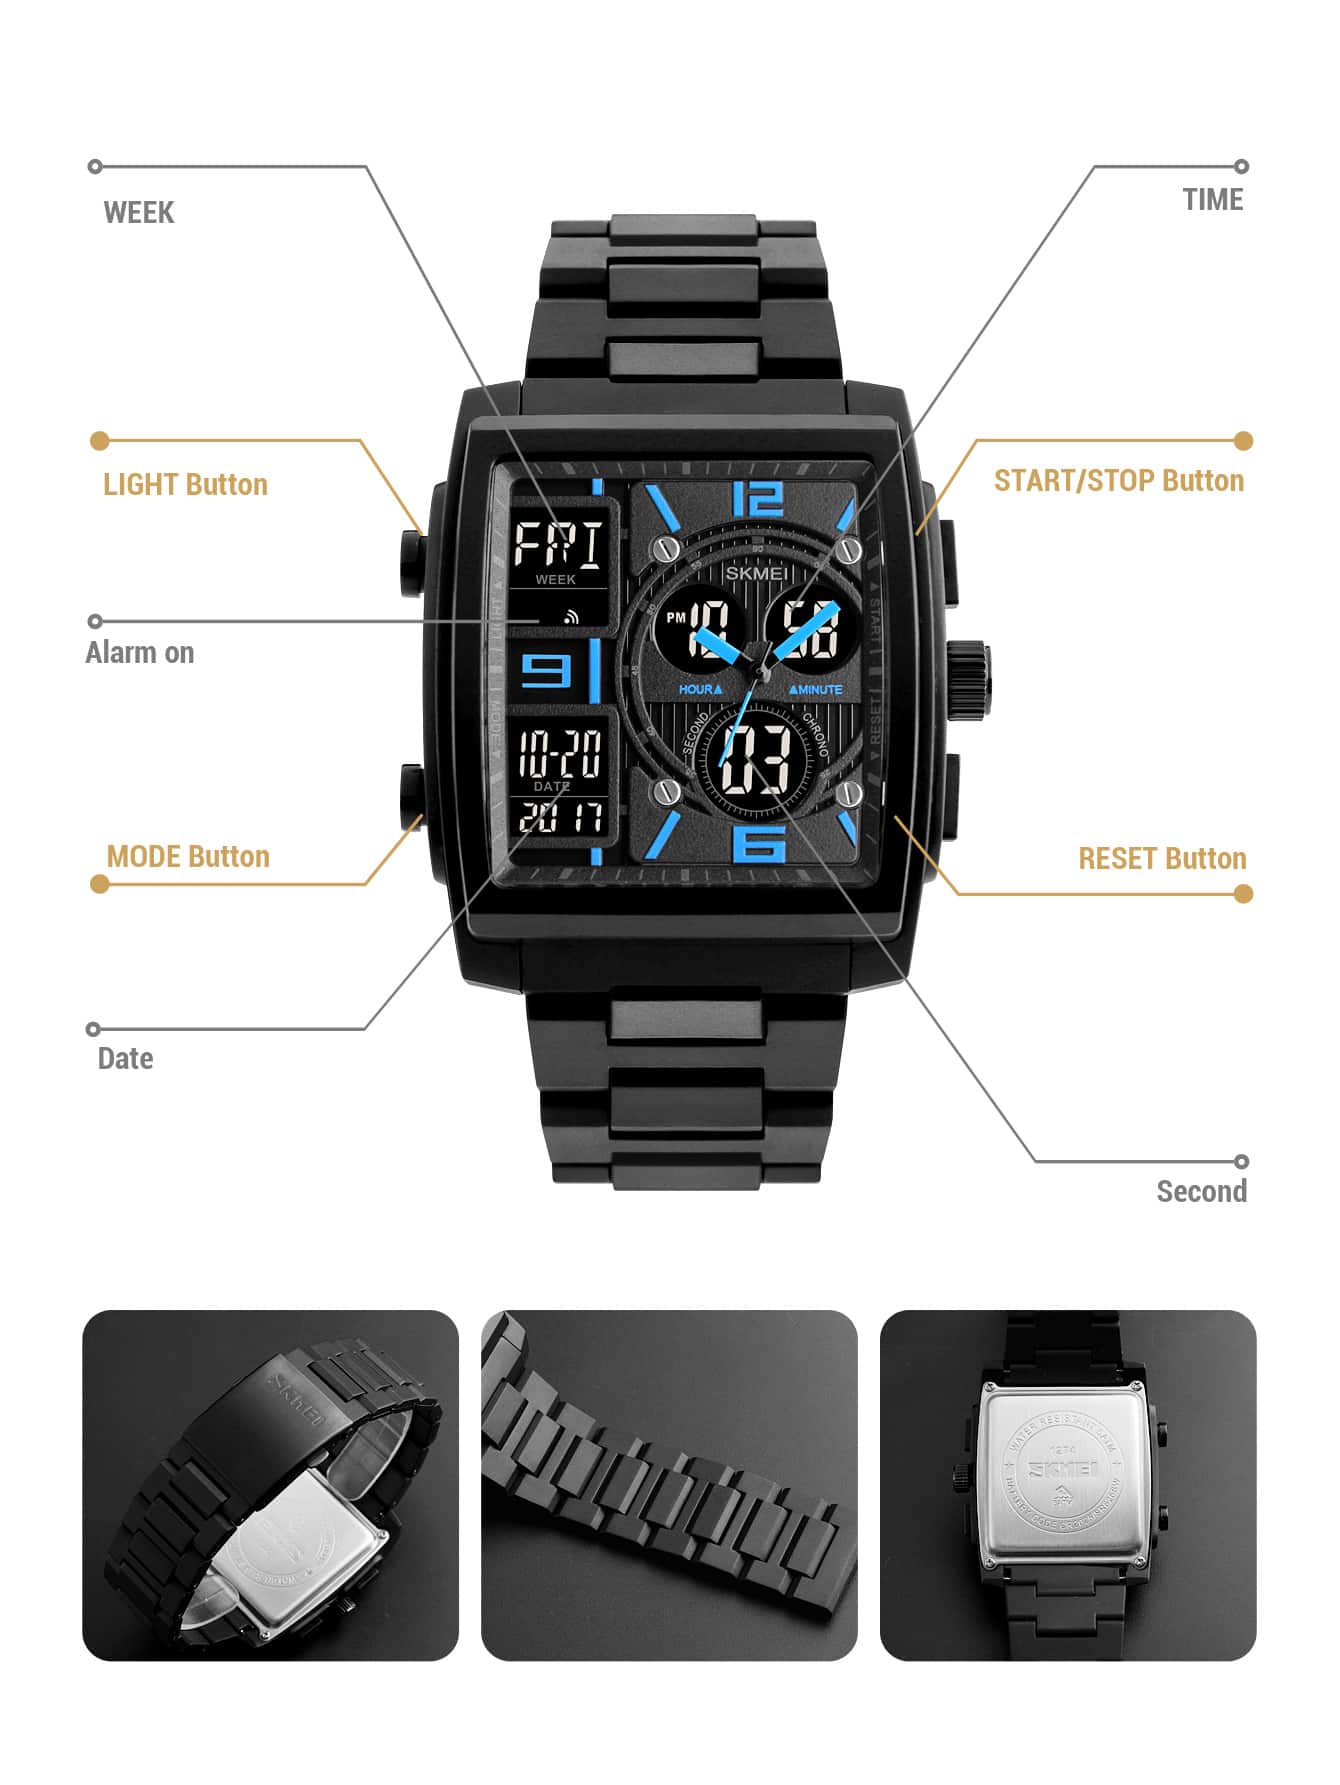 SKMEI 1pc Black TPU Strap Vintage Stopwatch Water Resistant Calendar 24 Hour Square Dial Digital Watch, For Daily Life